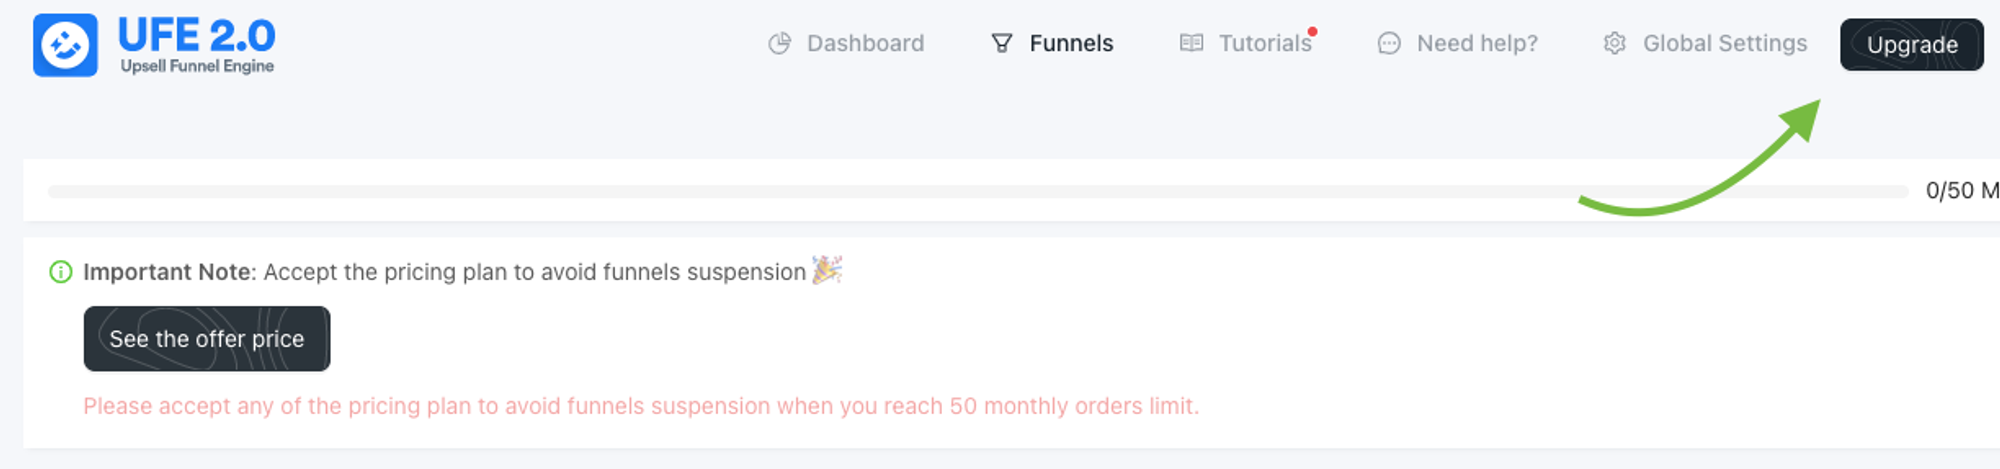 Upgrade plan in Upsell Funnel Engine